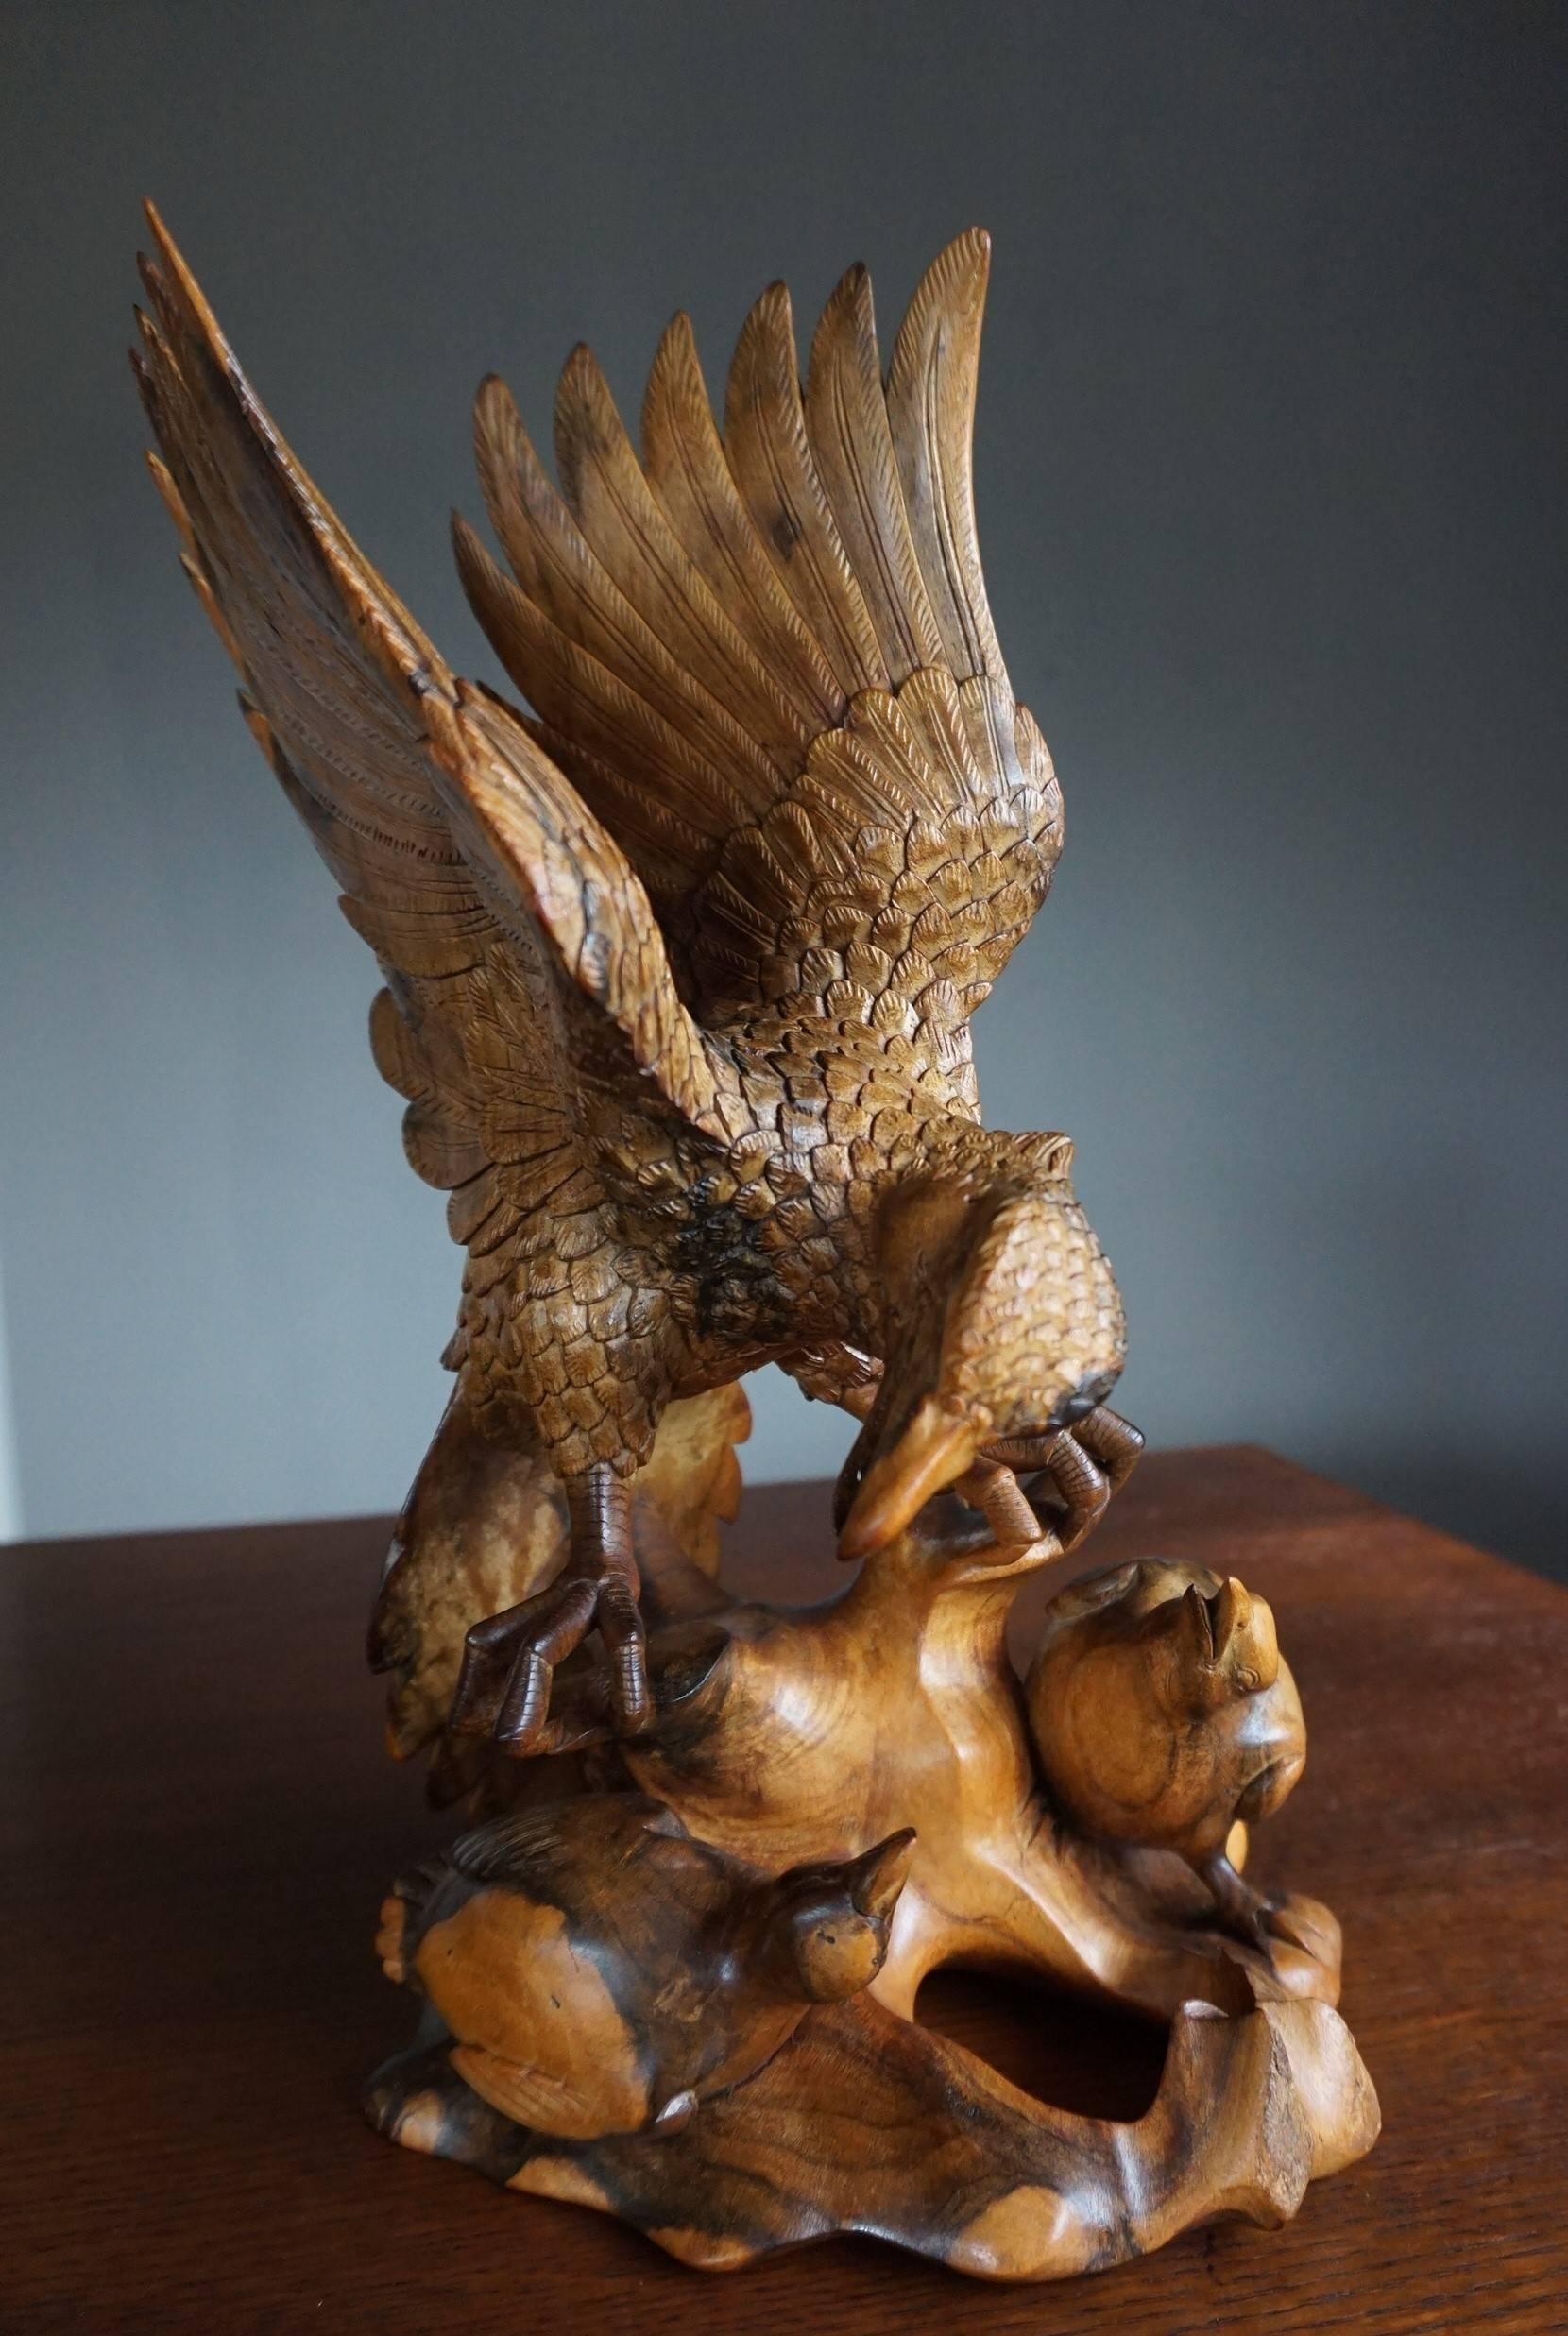 Wonderful macassar wildlife sculpture.

This incredibly well crafted sculpture shows a majestic bird feeding its insatiable chicks. The quality of the carving, the excellent condition and the perfect and natural posture of this nurturing marvel of